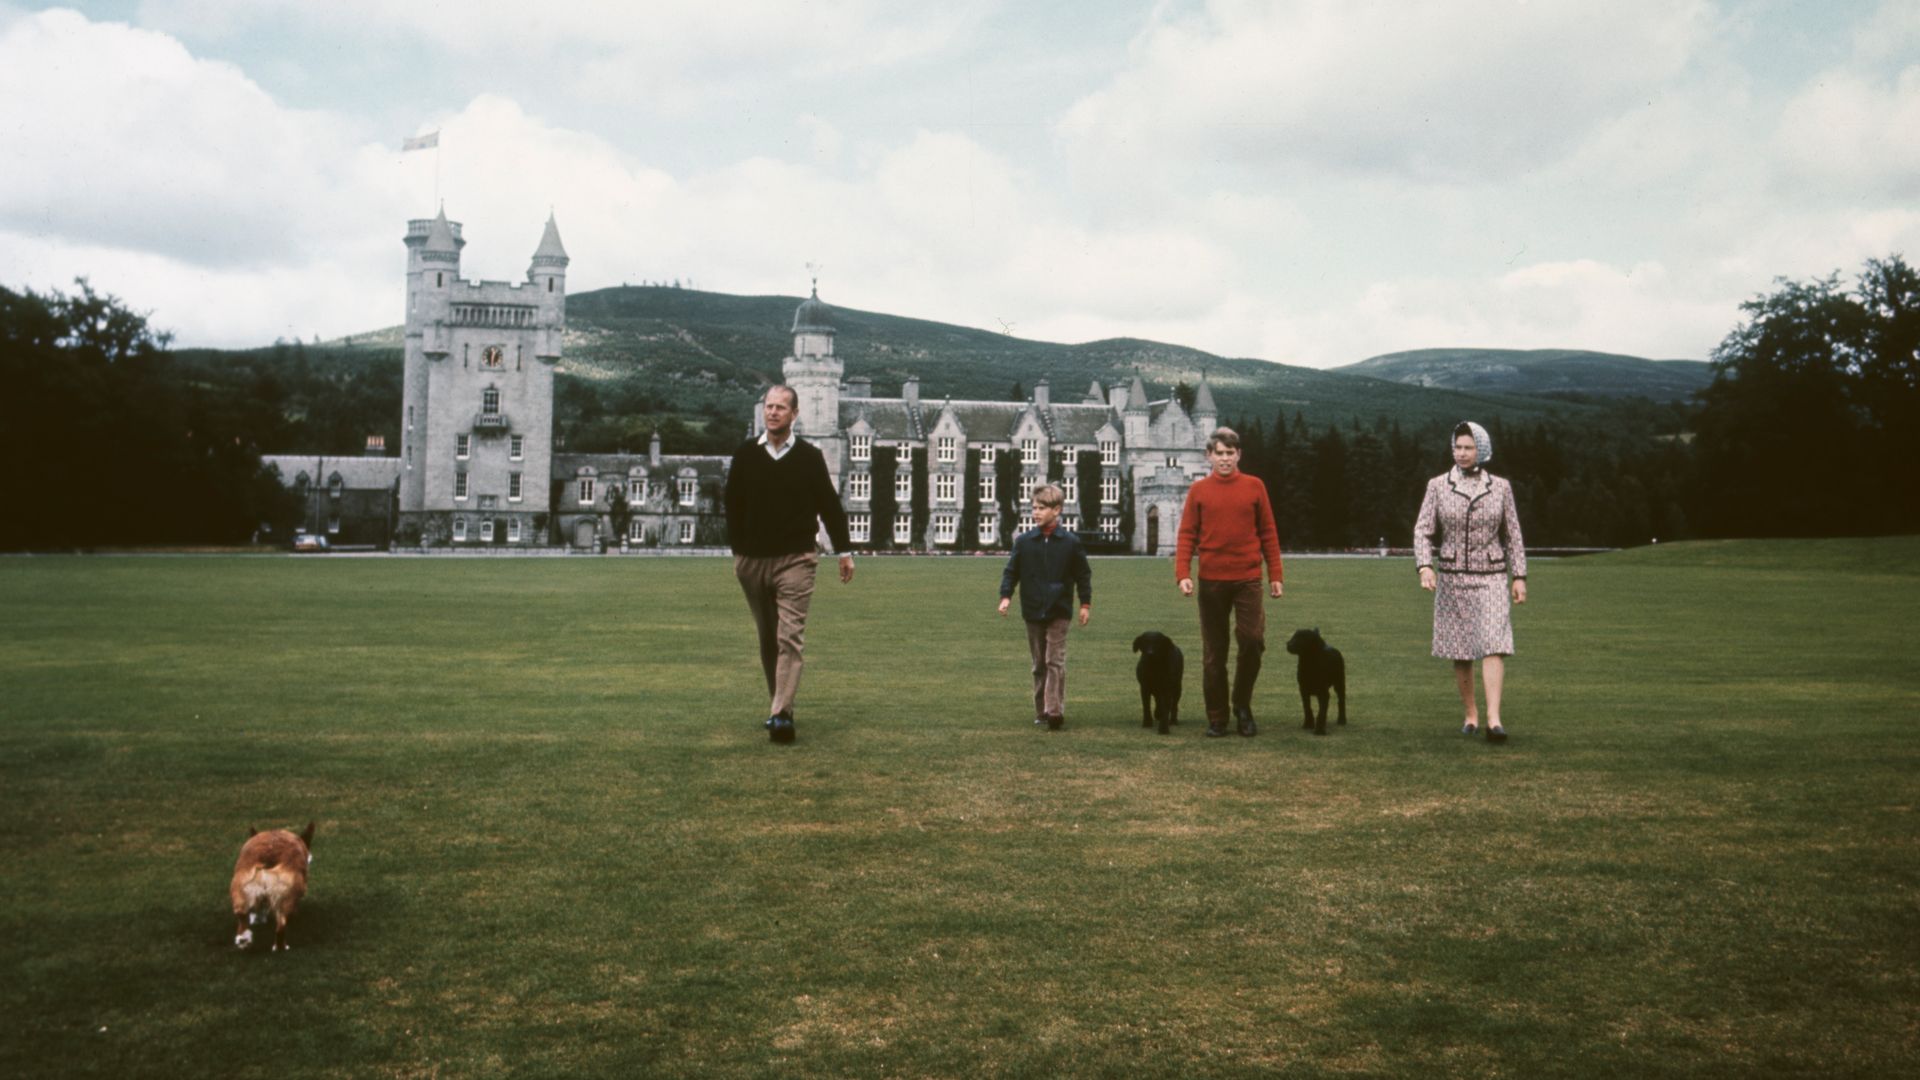 Queen Elizabeth II and Prince Philip, the Duke of Edinburgh with their sons Prince Edward and Prince Andrew (in red) at Balmoral Castle in Scotland, on their Silver Wedding anniversary year, September 1972.  (Photo by Keystone/Hulton Archive/Getty Images)